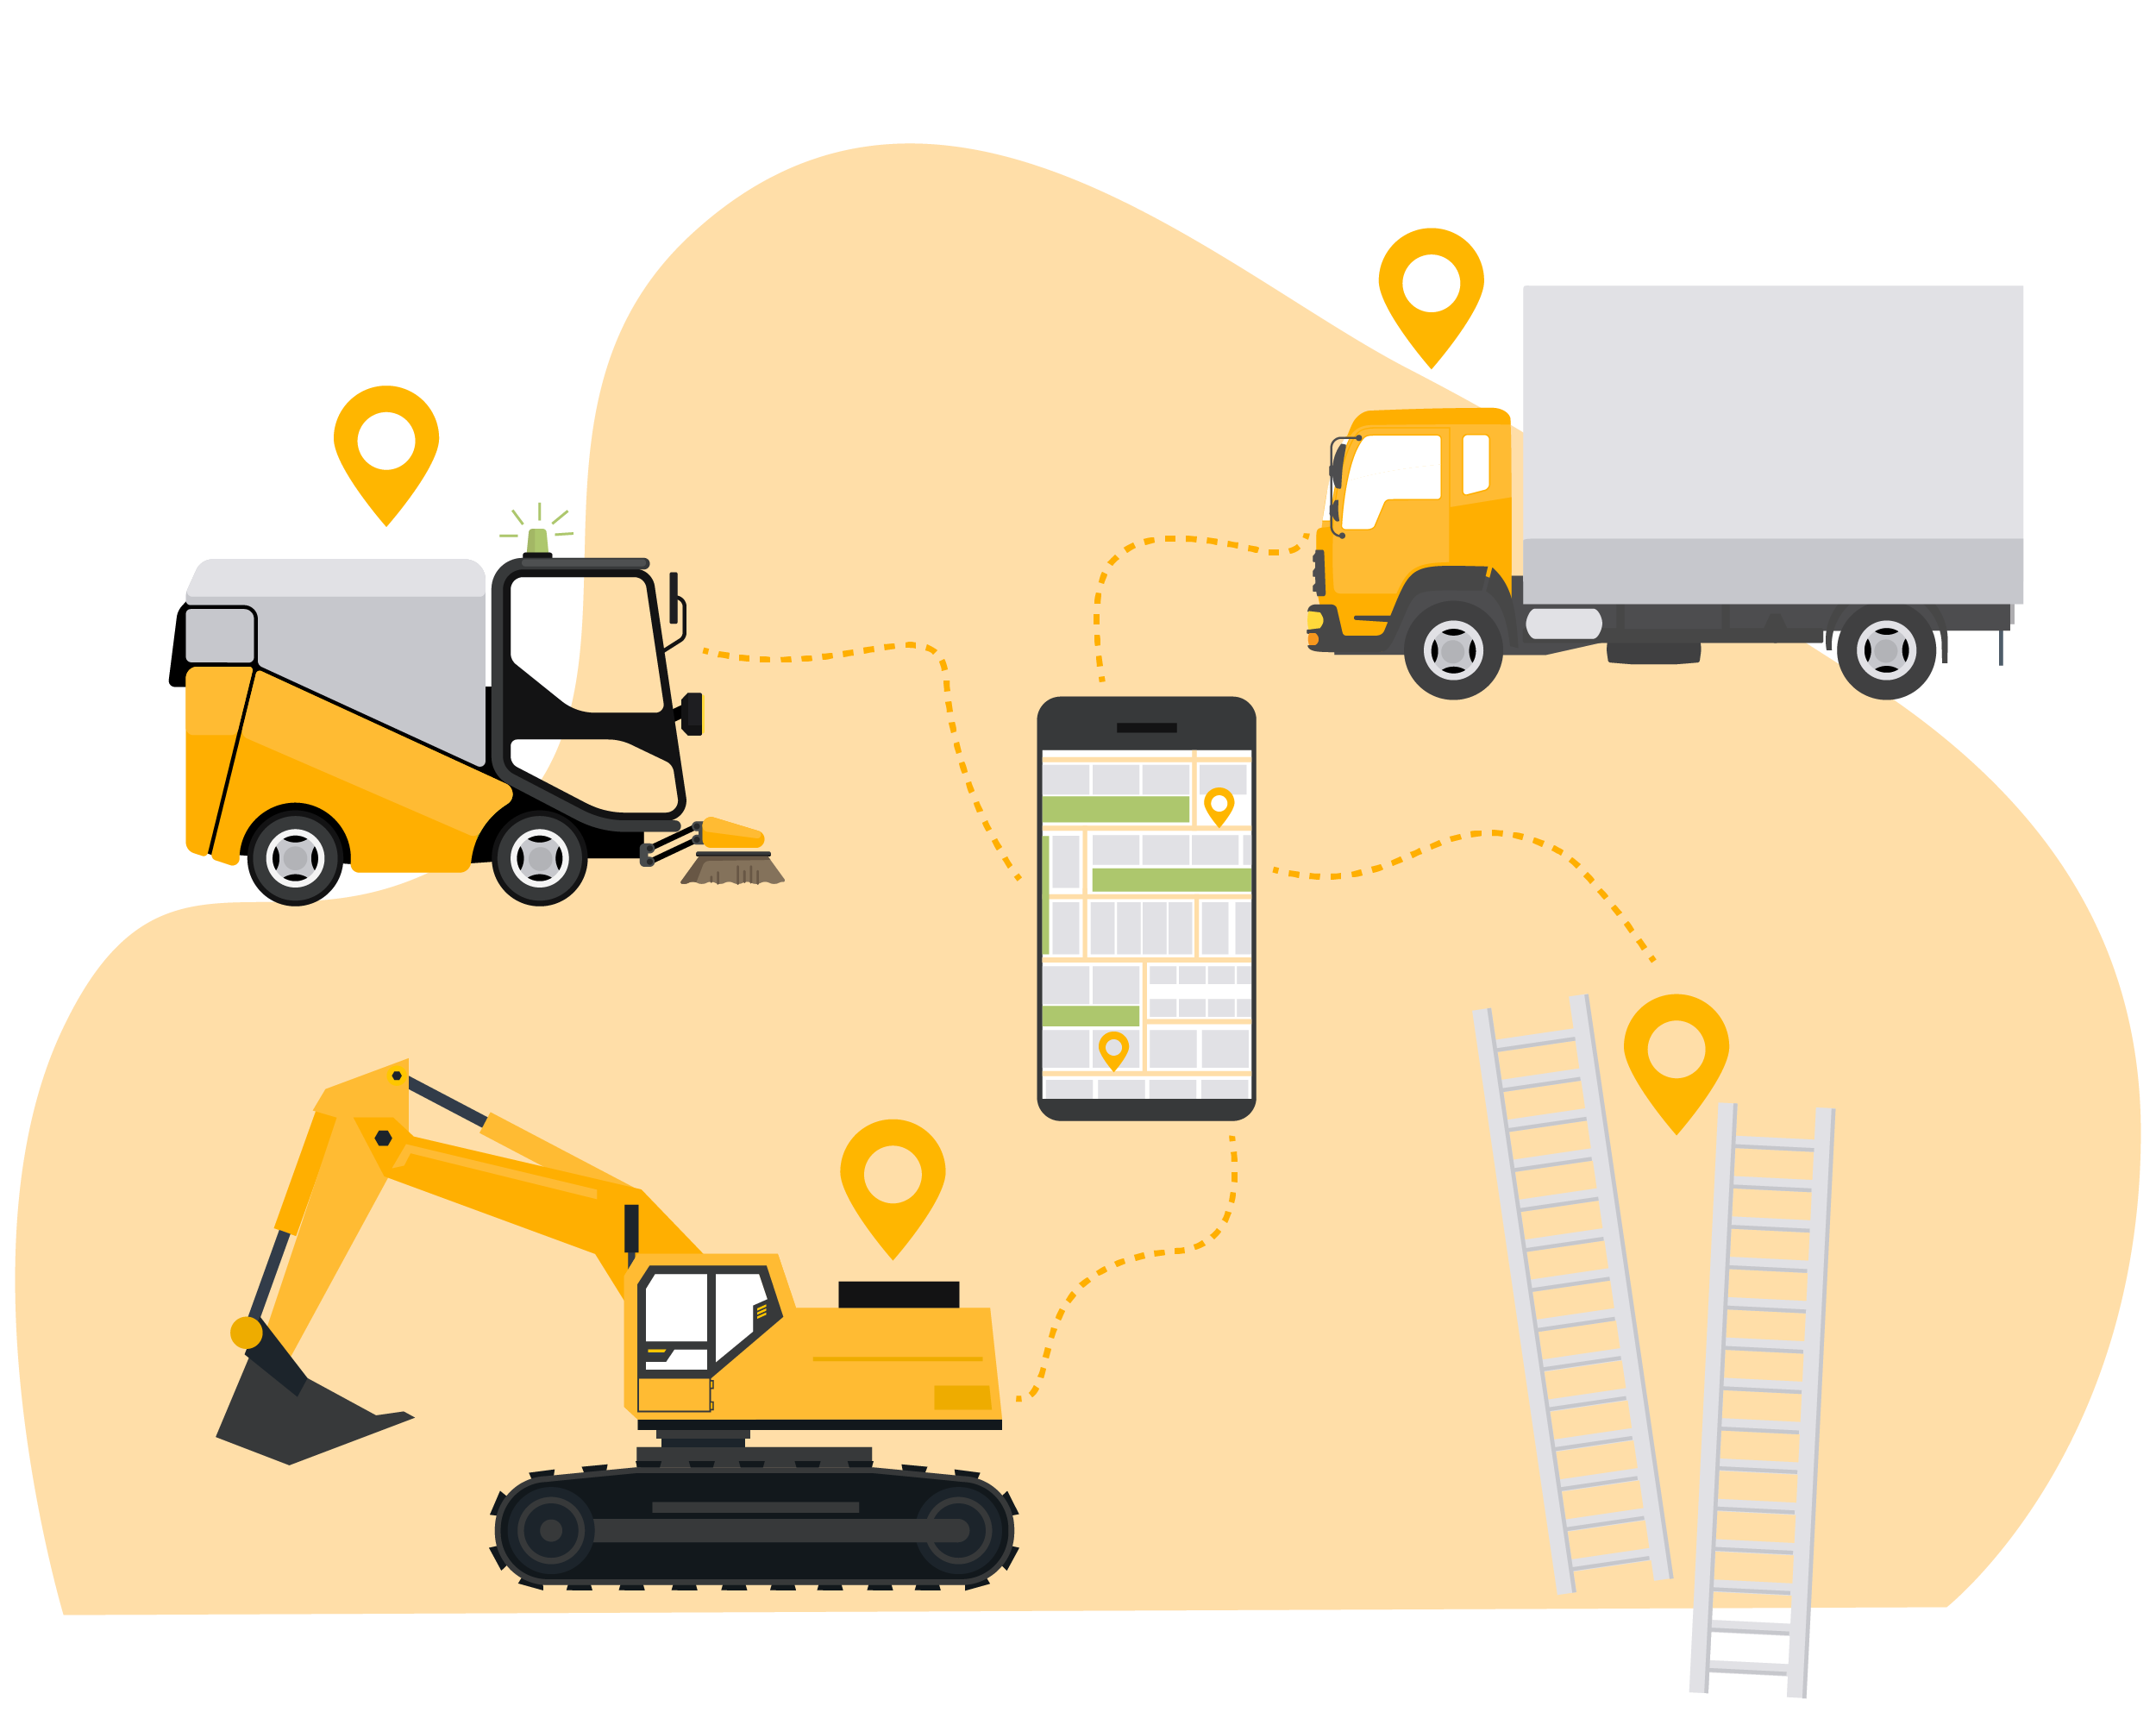 Illustration showing a smarthphone tracking different vehicles and tools.